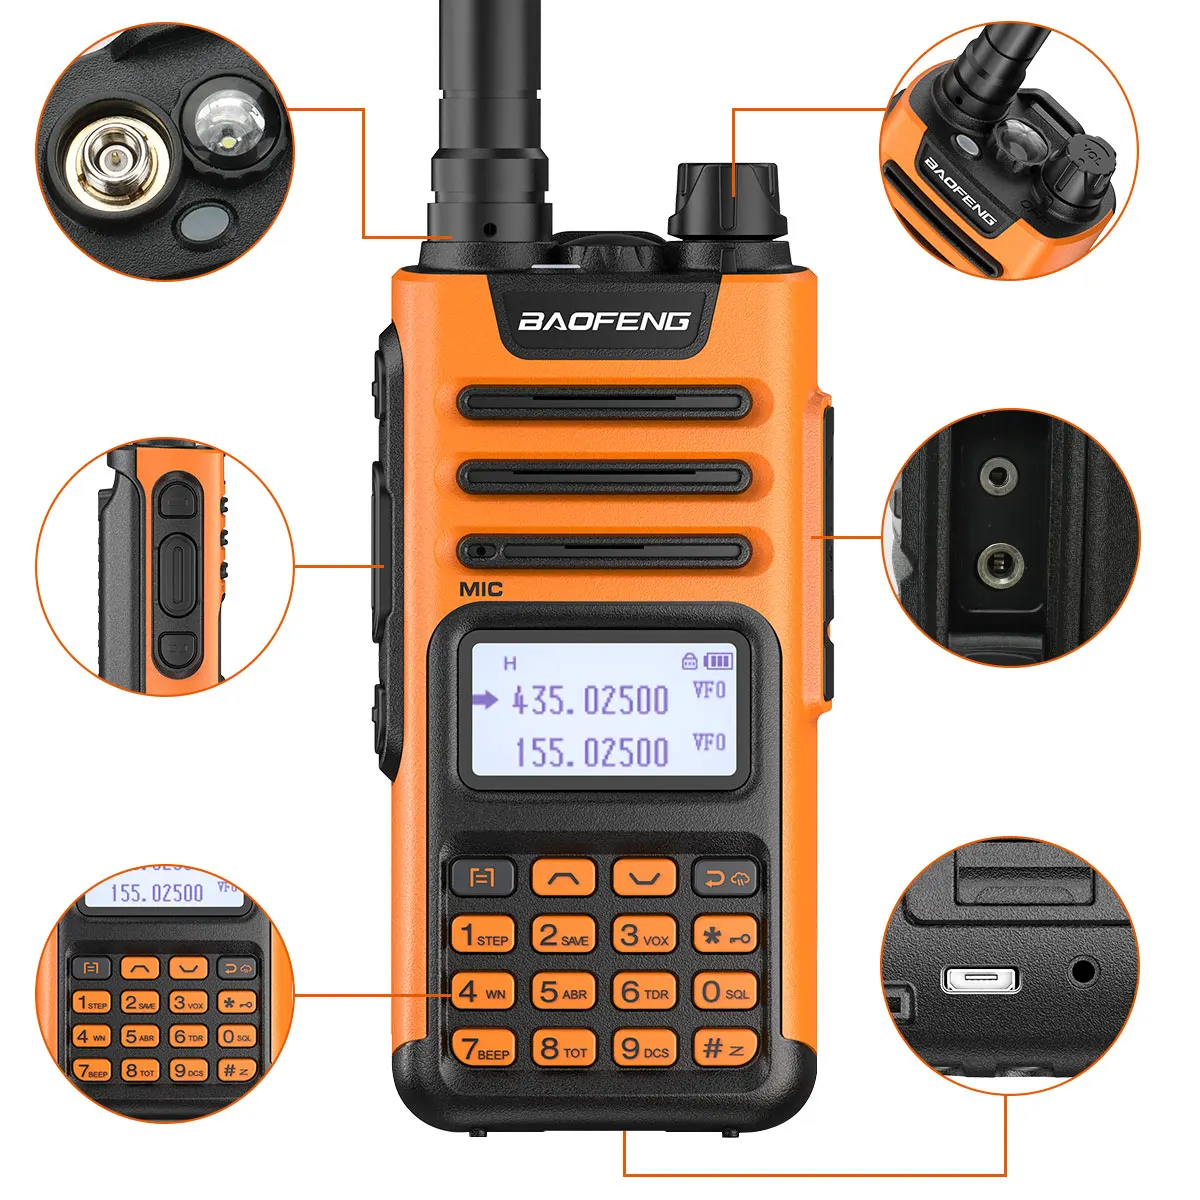 2pcs Baofeng Uv13 Pro 10w Powerful Handheld Transceiver Dual Band Walkie  Talkie Upgrade Of Uv-10r Two Way Radio With Typ-c Cable Walkie Talkie  AliExpress